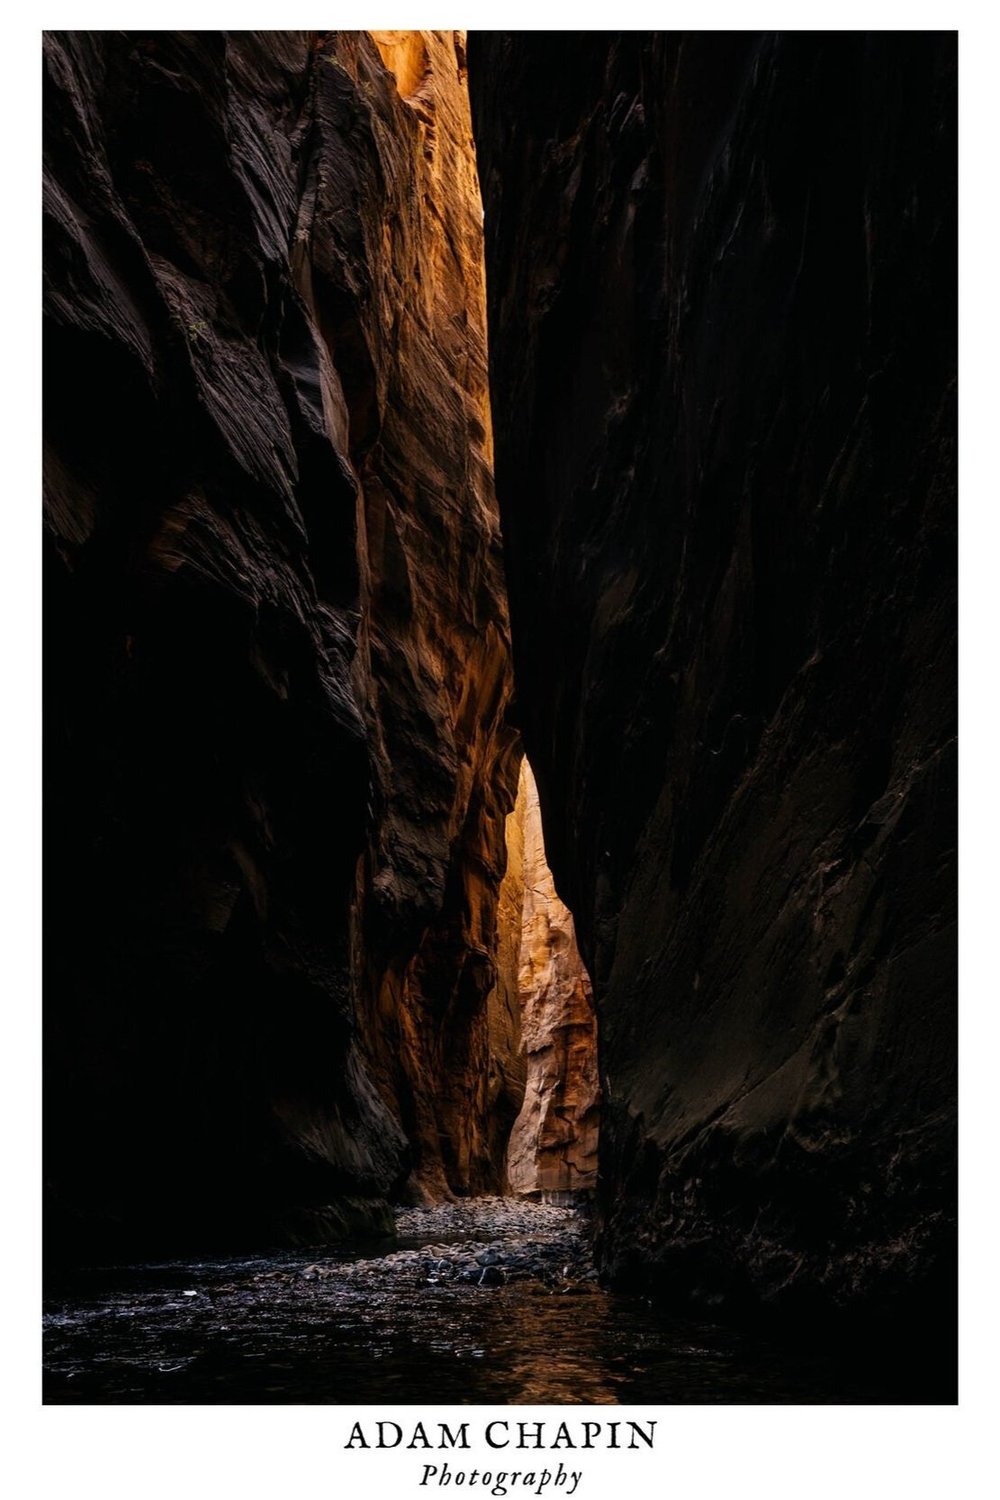 the close canyon walls on wall street in the narrows of Zion National Park